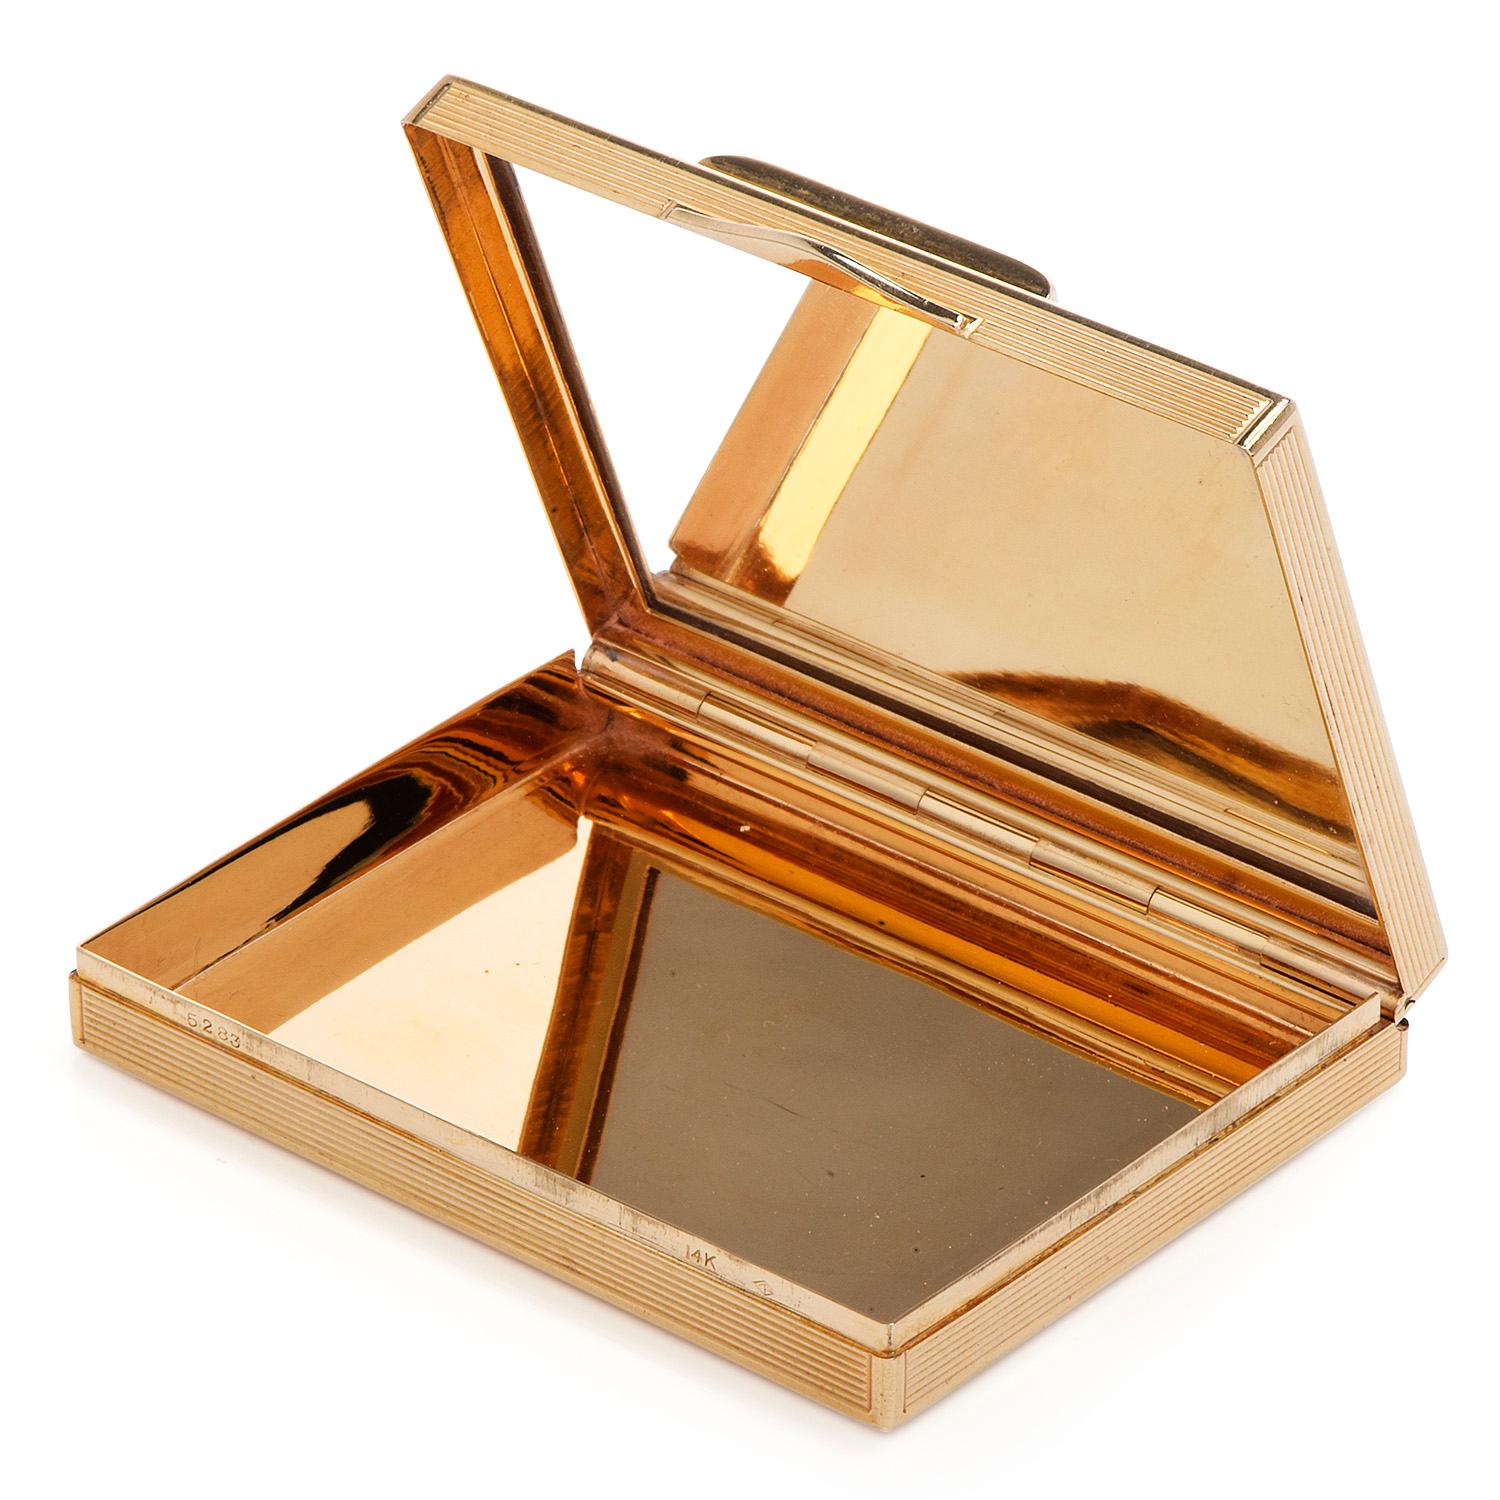 This vintage retro authentic compact Gold box, textured design with rubies & diamonds.

with an inner vanity mirror. it is crafted in solid 14K yellow gold, weighing 89.1 grams and measuring 2 3/4